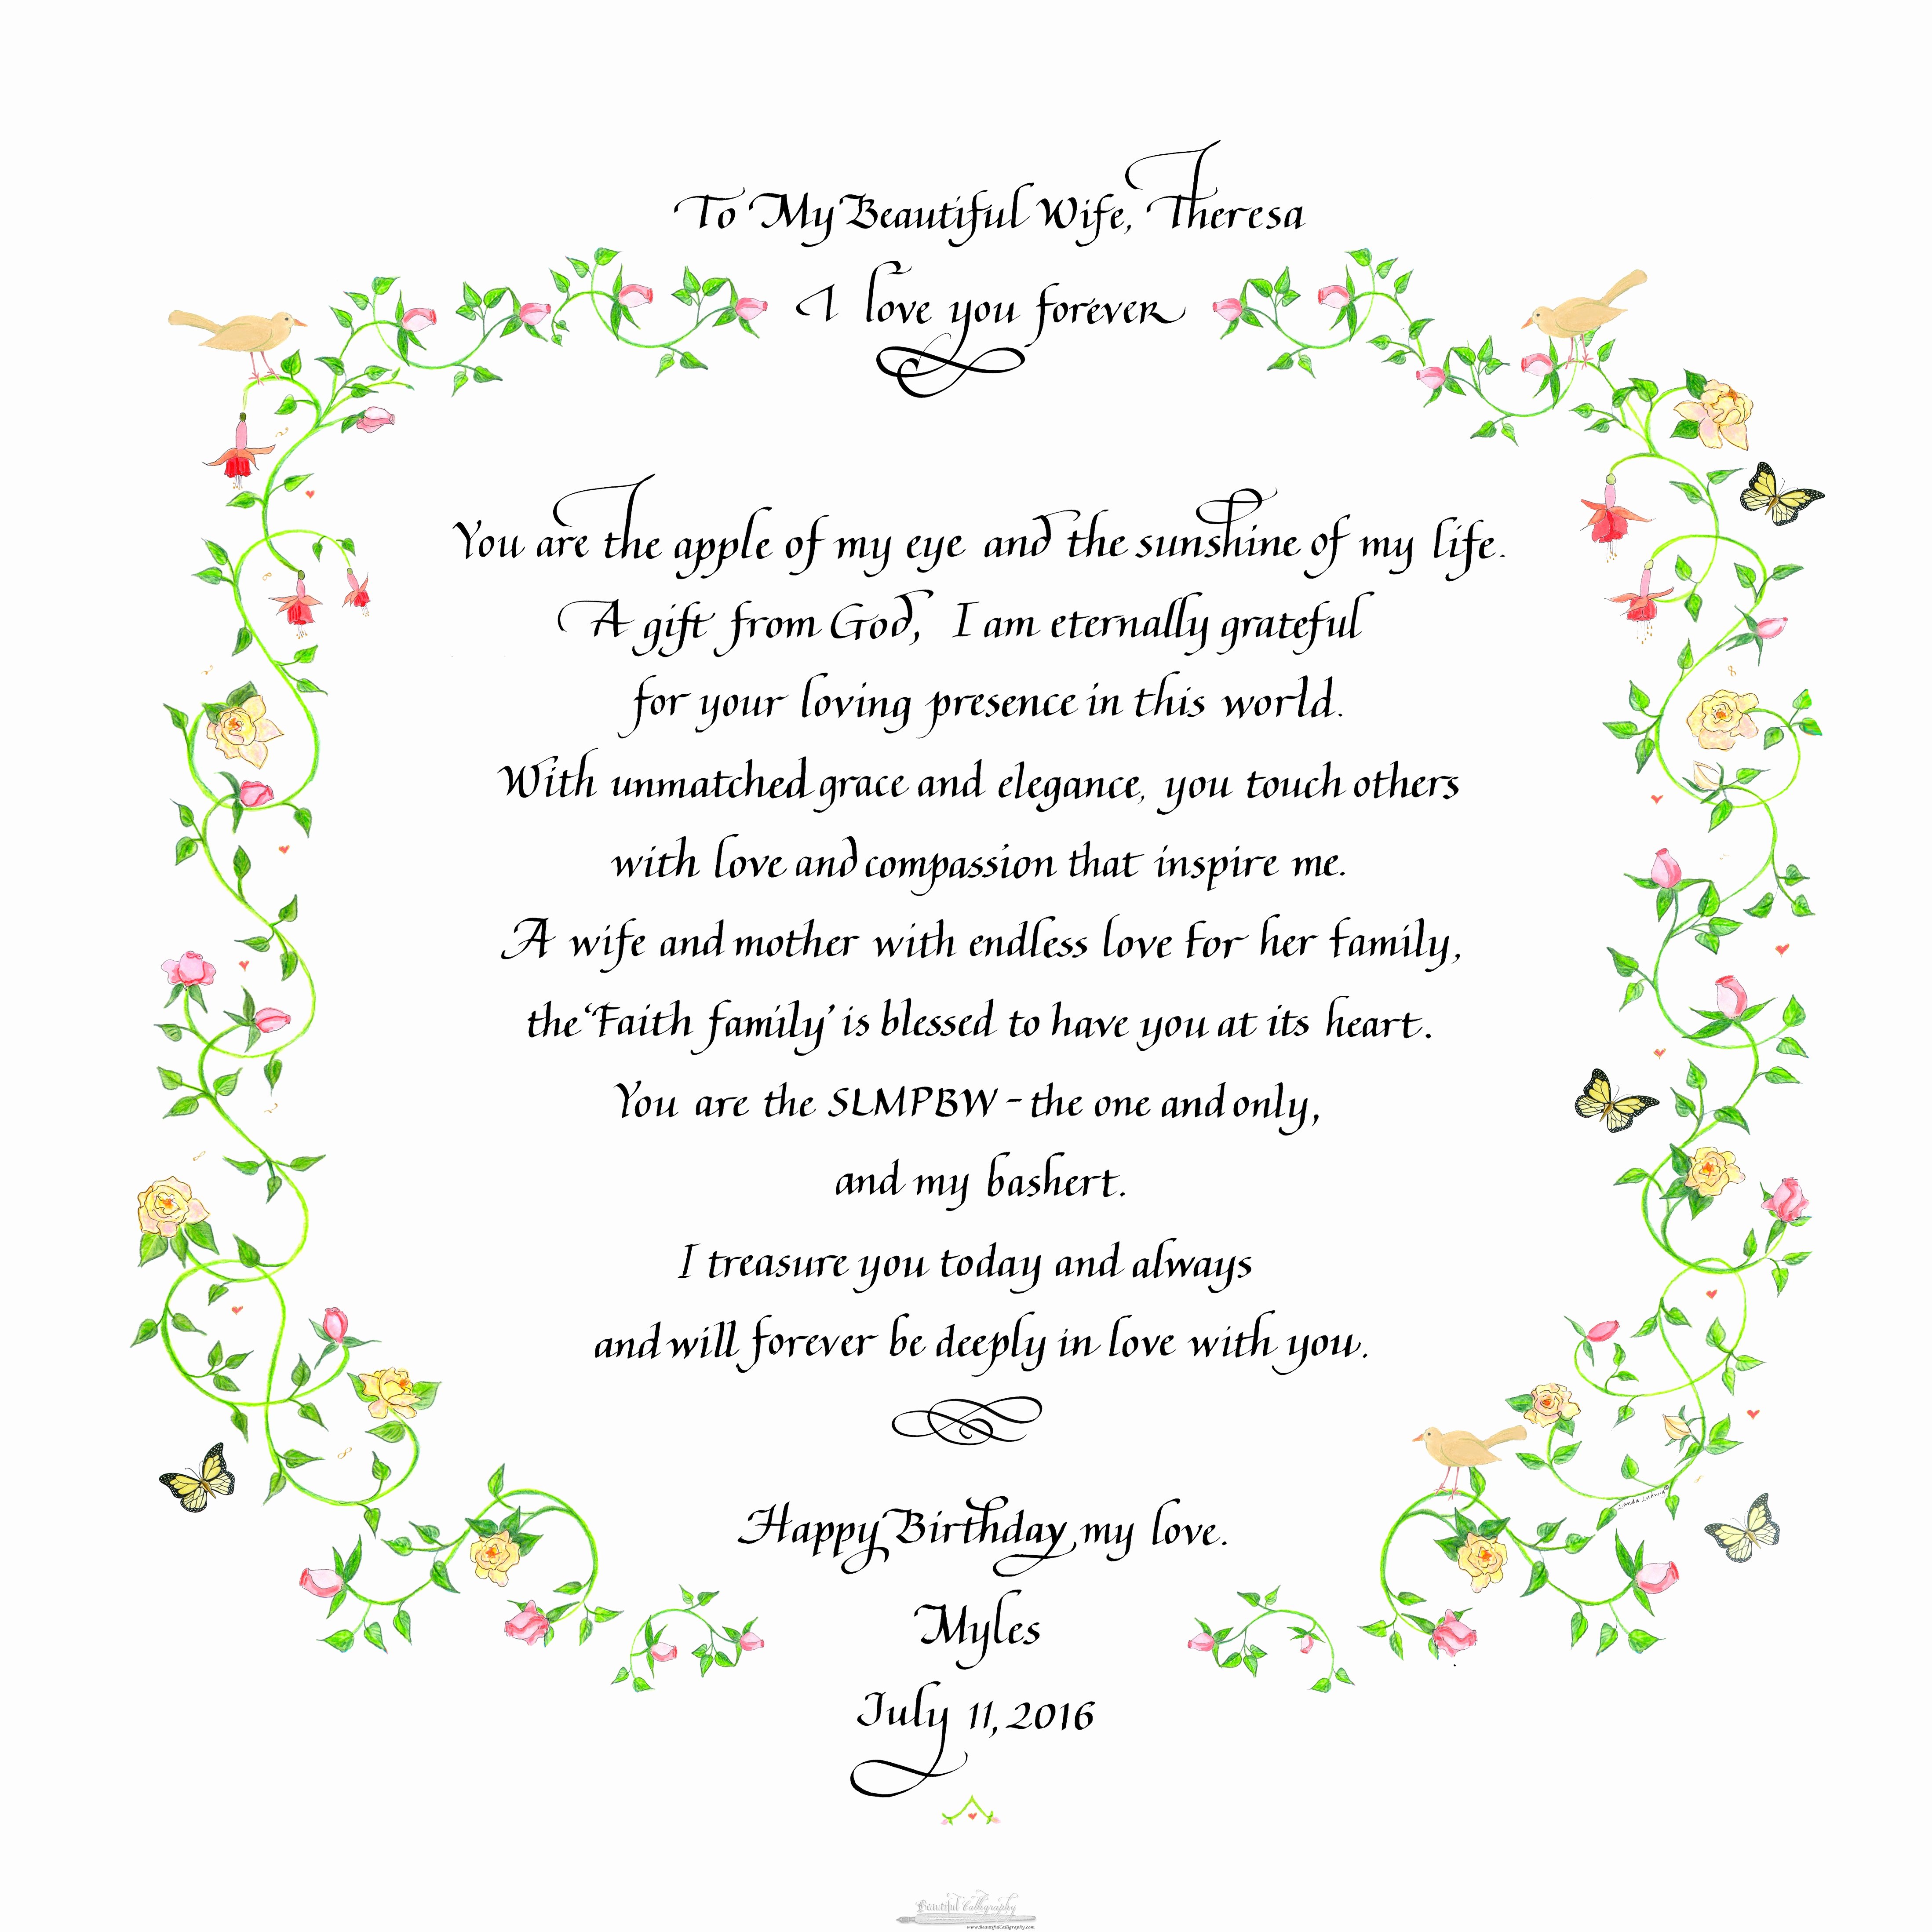 Anniversary Letter to Wife Elegant Calligraphy with A Wedding Photo the Perfect Anniversary